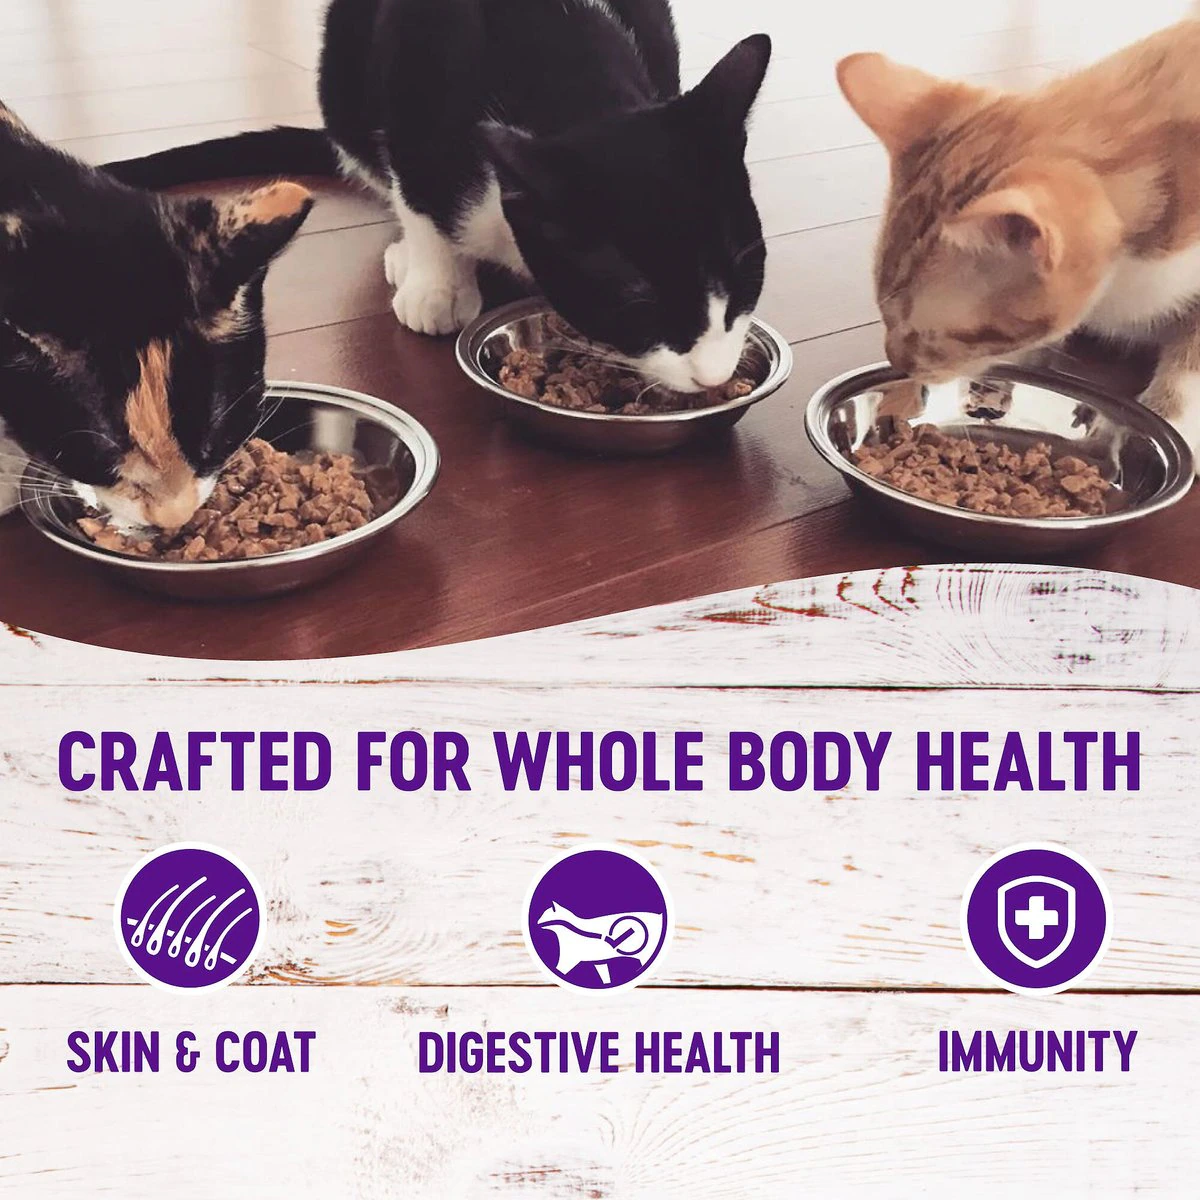 Wellness Healthy Indulgence Morsels Chicken & Chicken Liver Wet Cat Food  Canned Cat Food  | PetMax Canada